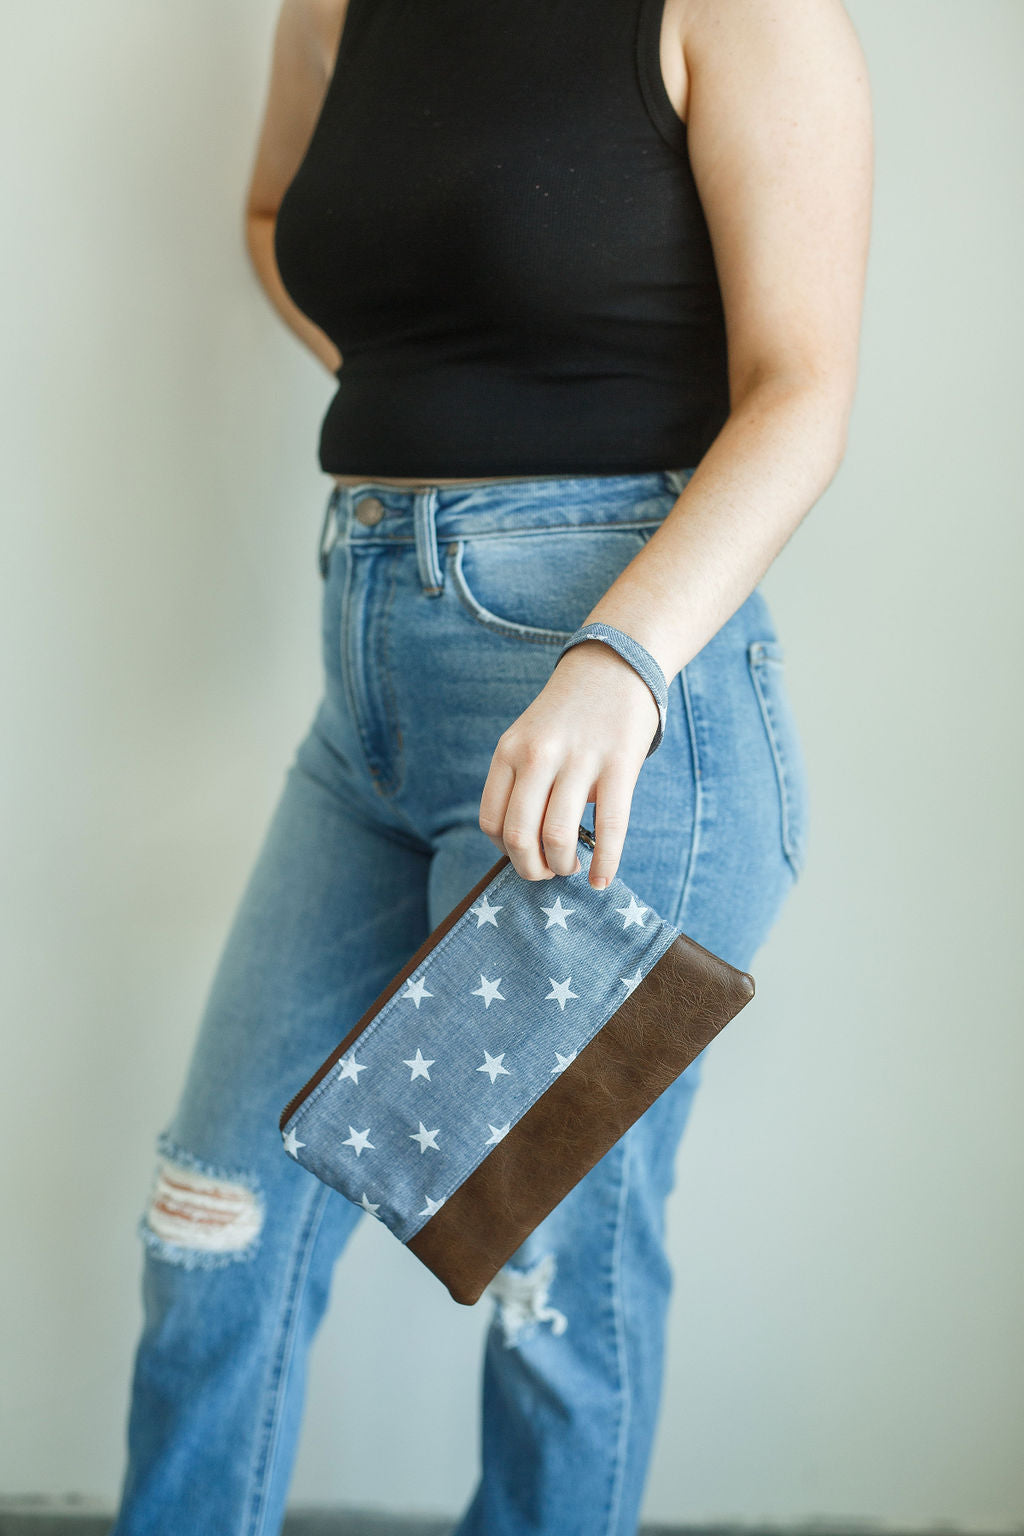 chambray wristlet with white stars and matching wrist strap. brown vinyl along the bottom and antique brass zipper